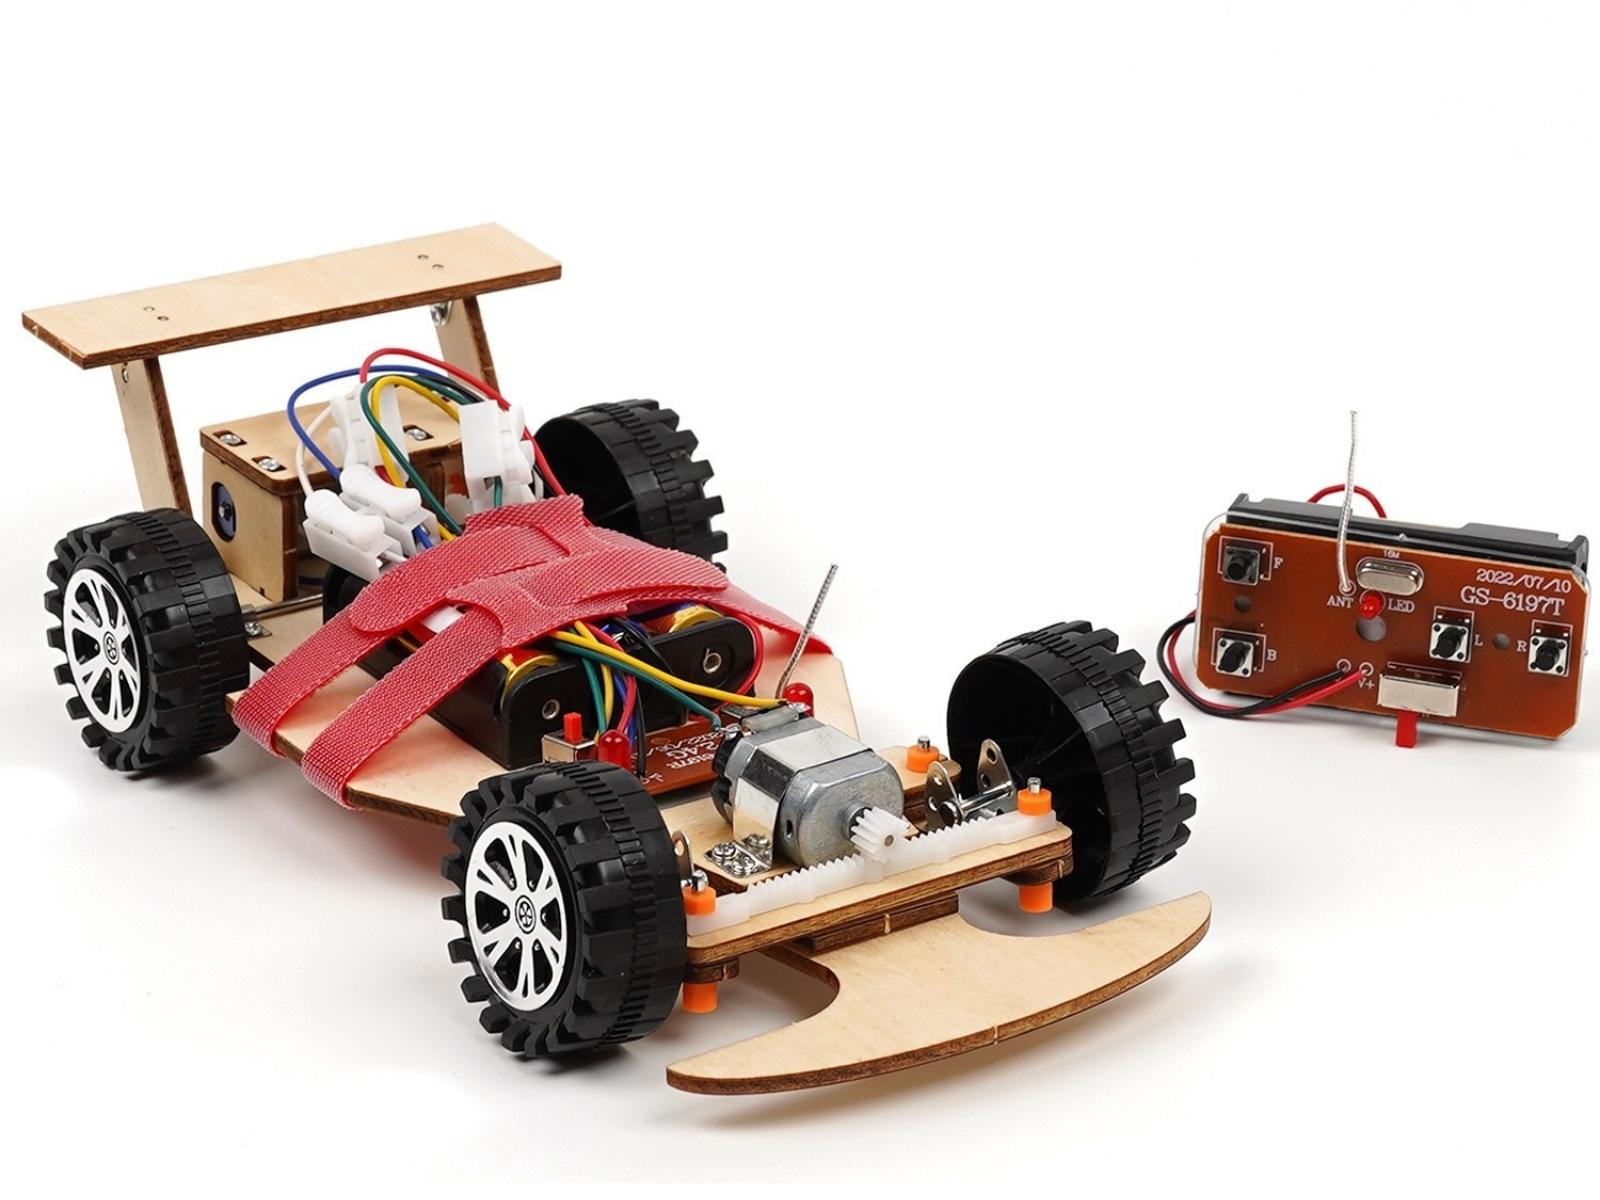 Pica Toys Wireless Remote Control Wooden Racing Car F1C - Upgraded  Competition Edition, Science Experiment R/C Car Kit for Kids, STEM Project  Model